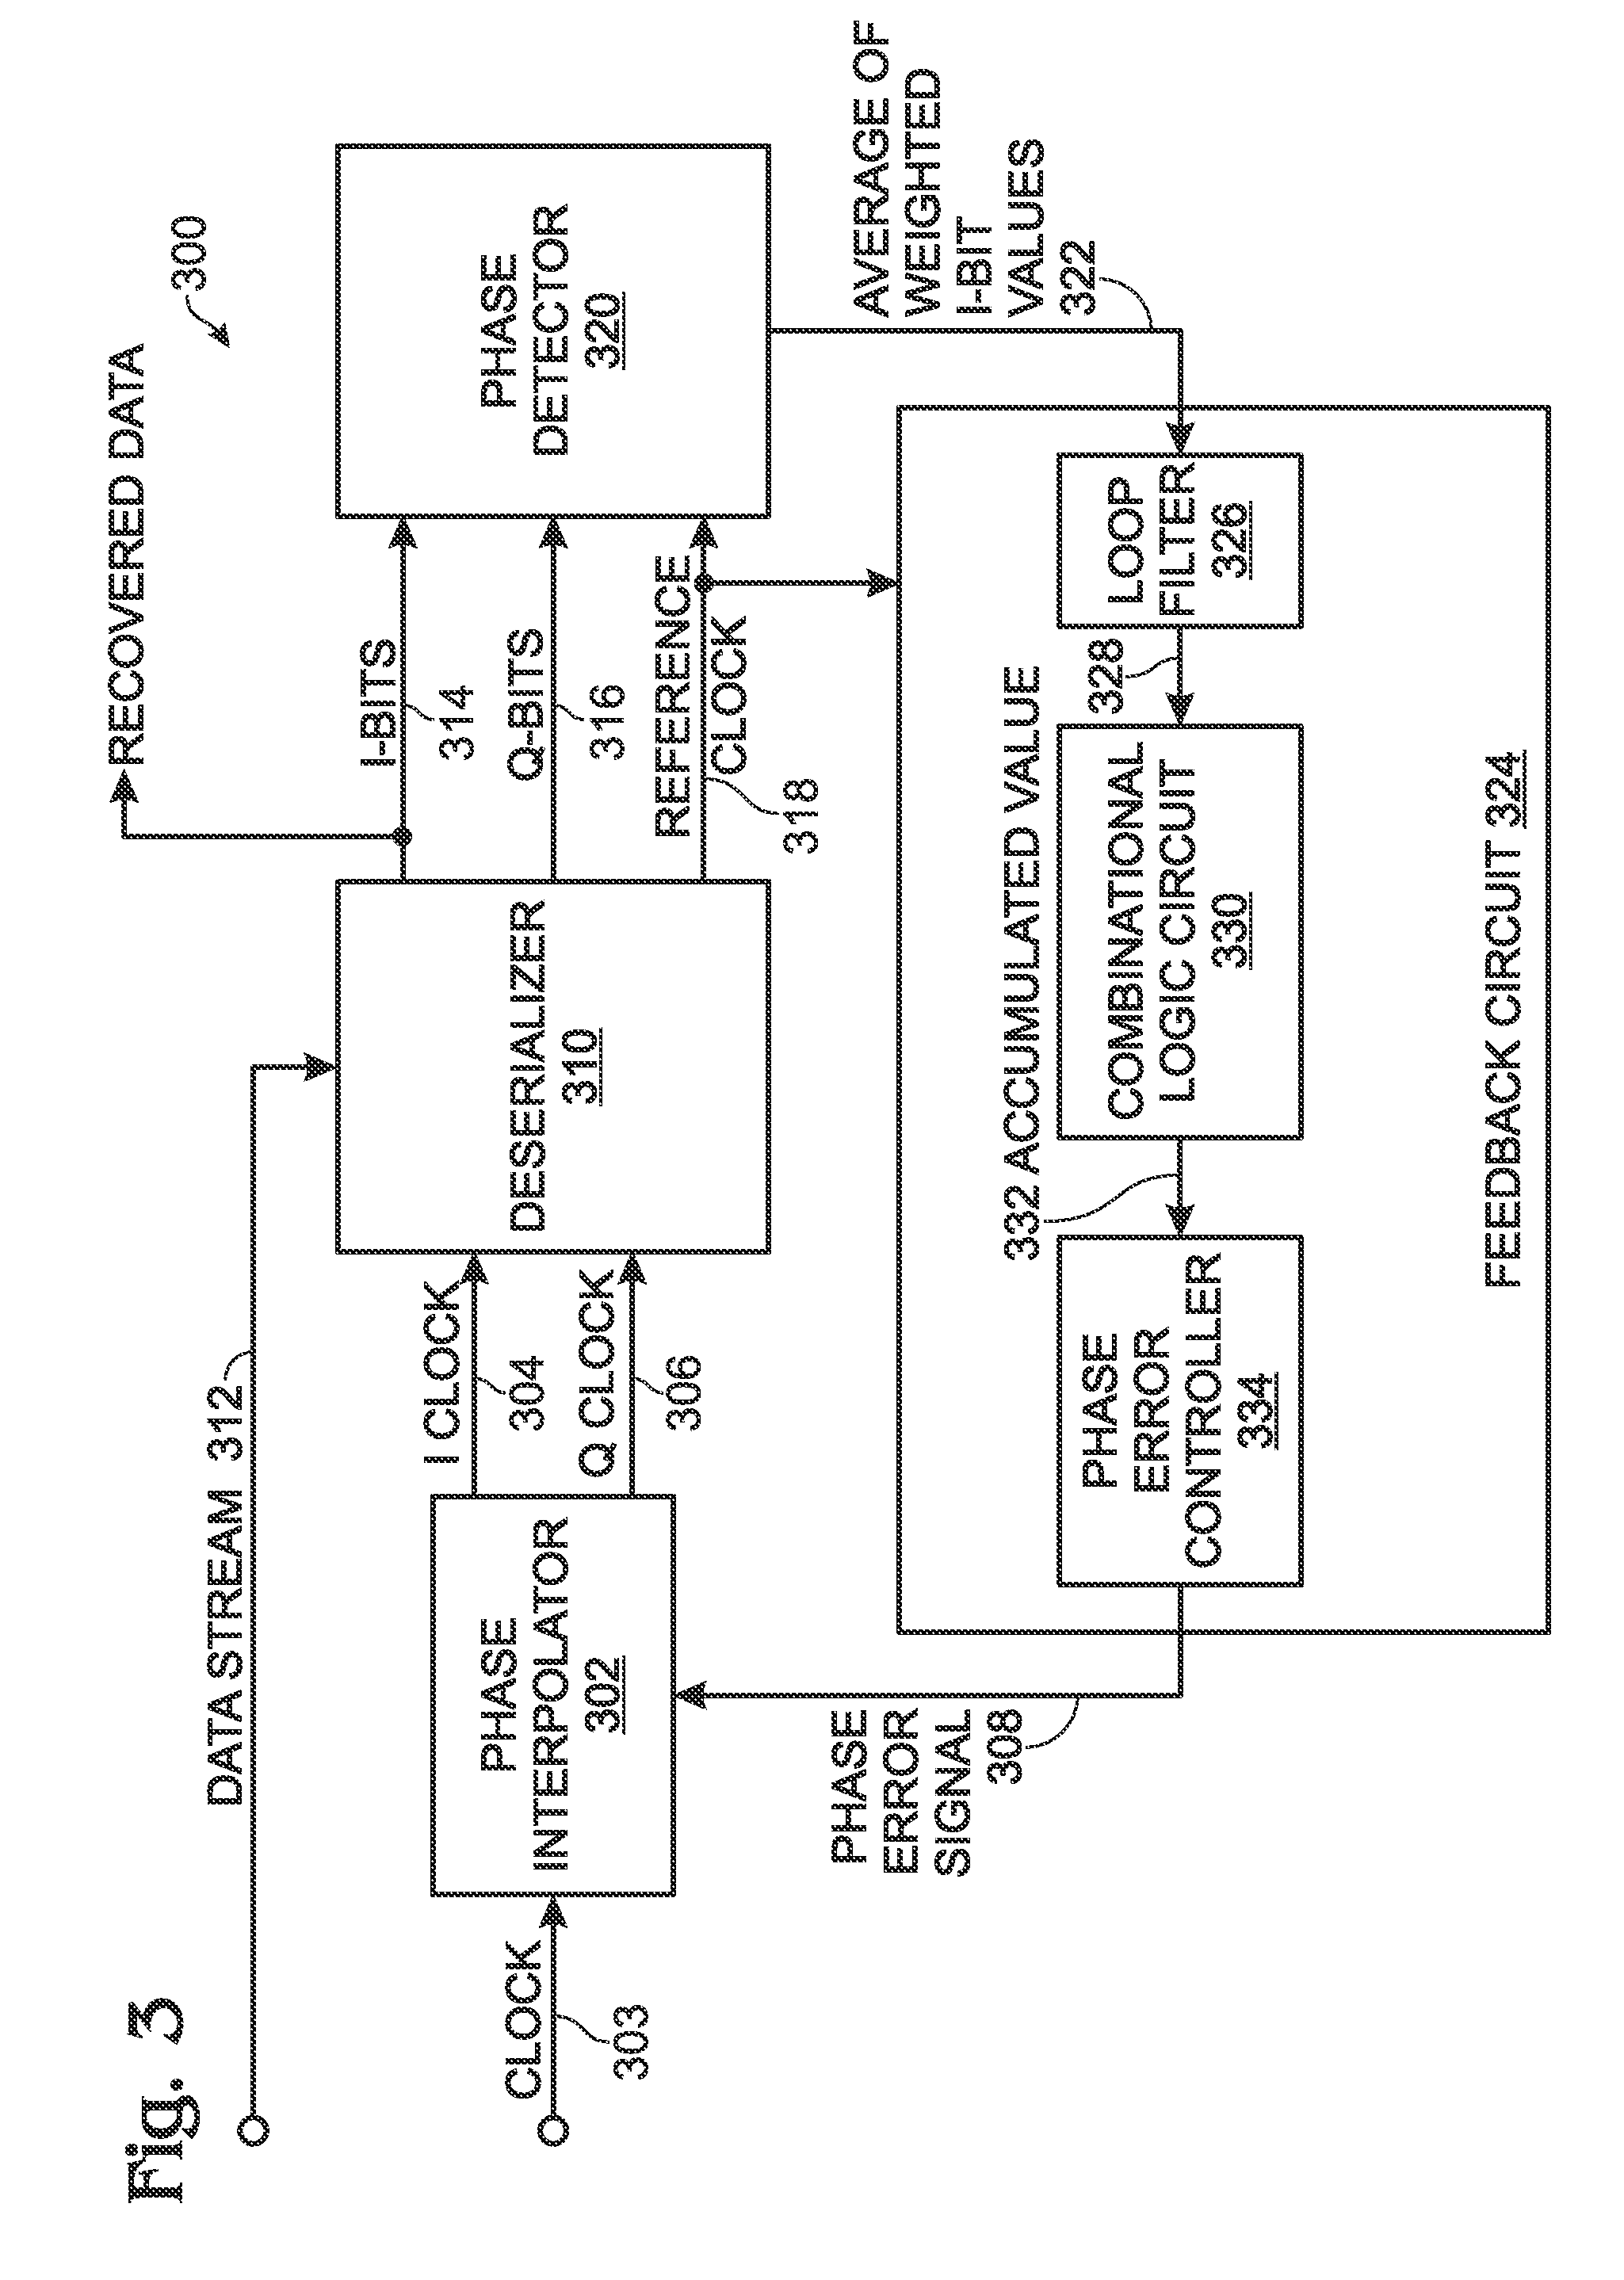 ISI pattern-weighted early-late phase detector with function-controlled oscillation jitter tracking